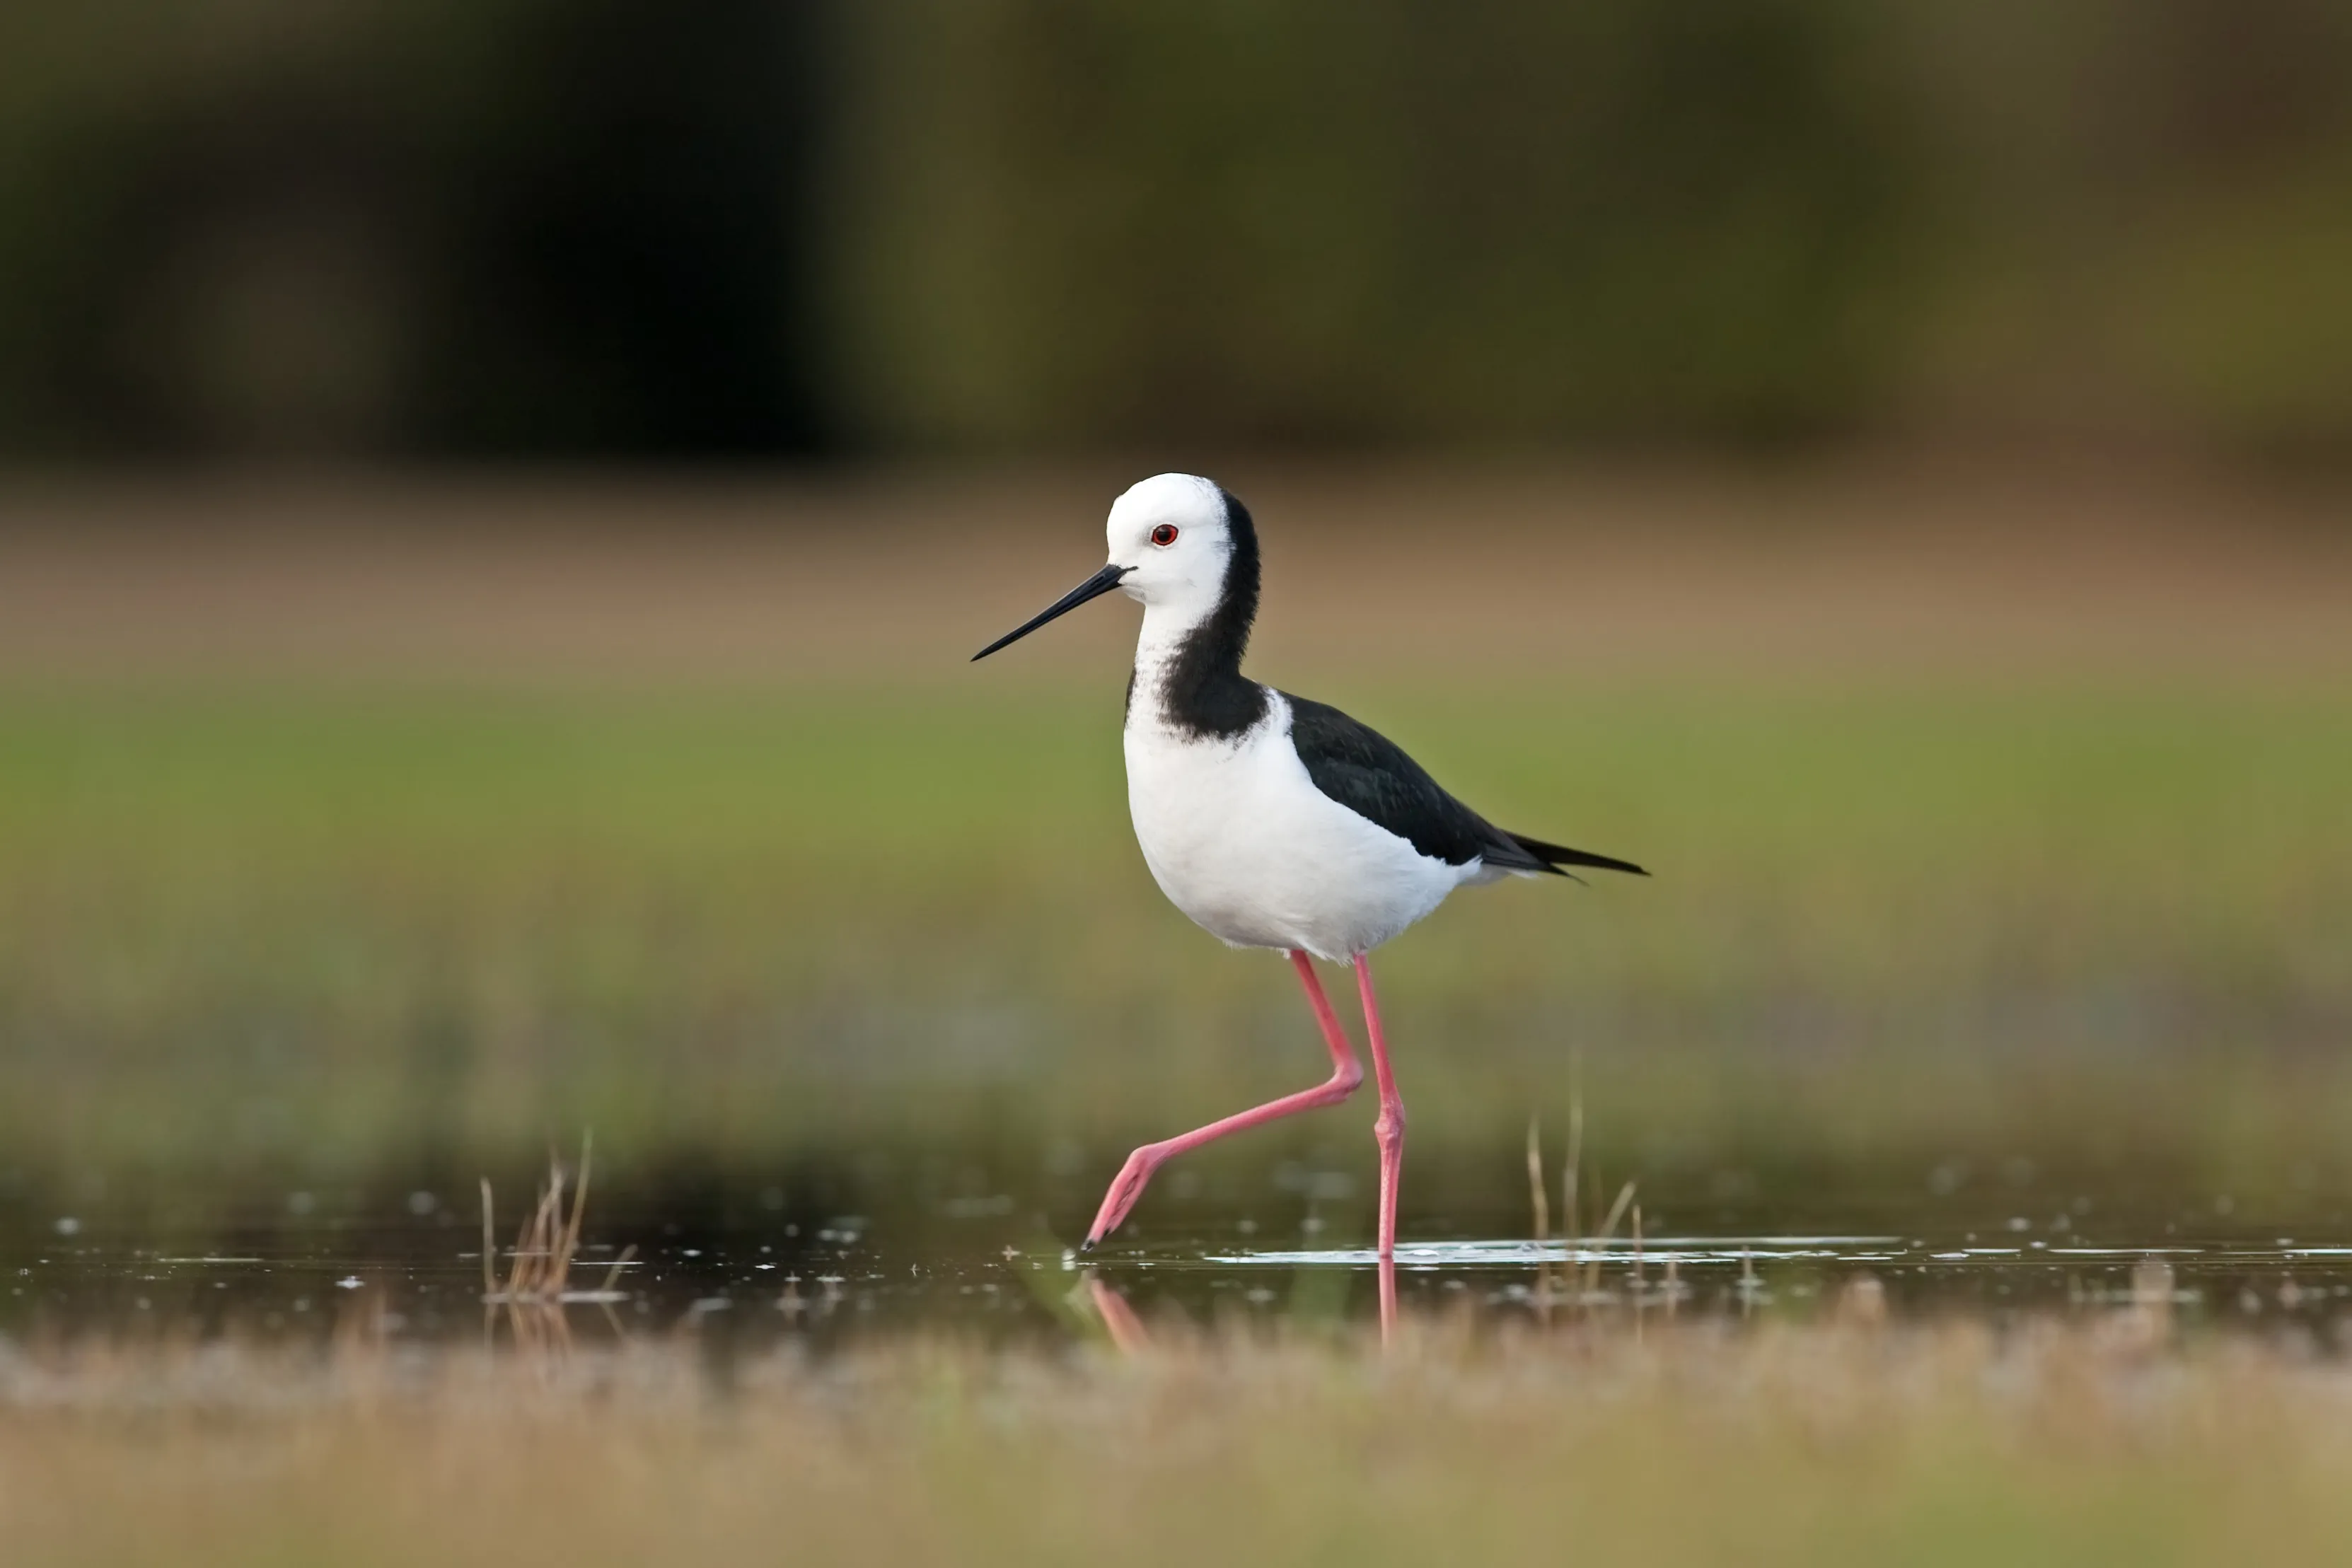 A lone Black-winged Stilt wading through shallow water, surrounded by grassland.